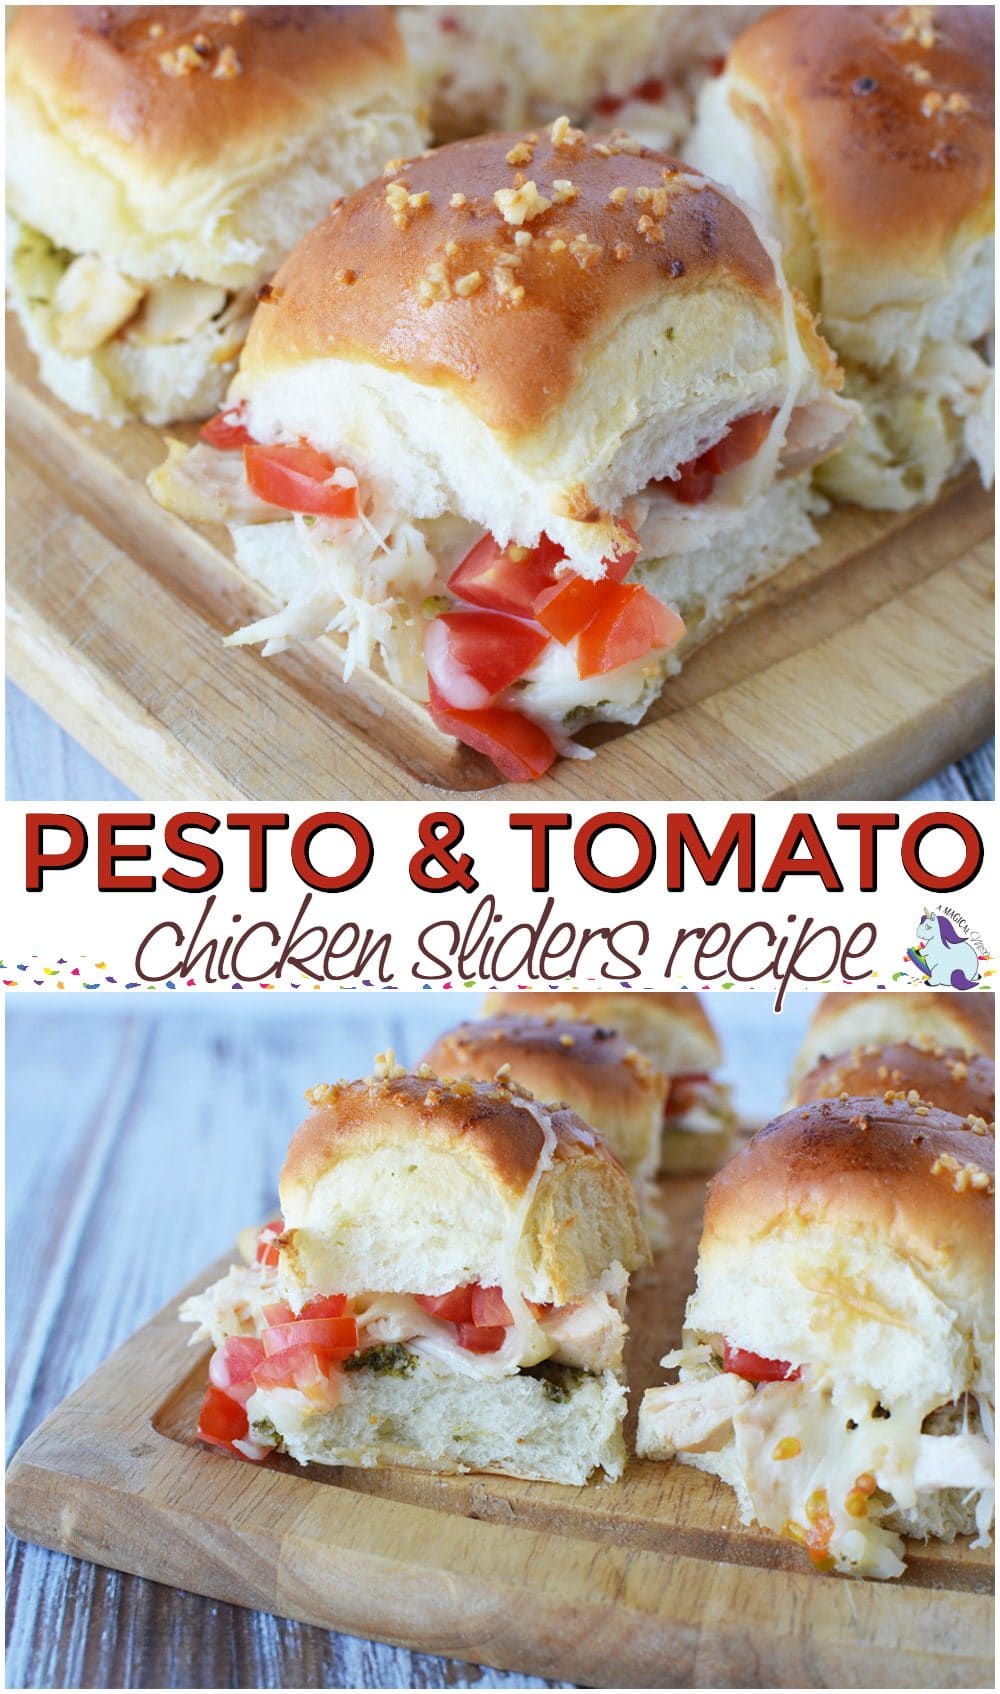 Pesto Chicken Sliders Recipe for Tasty Game Day Party Food